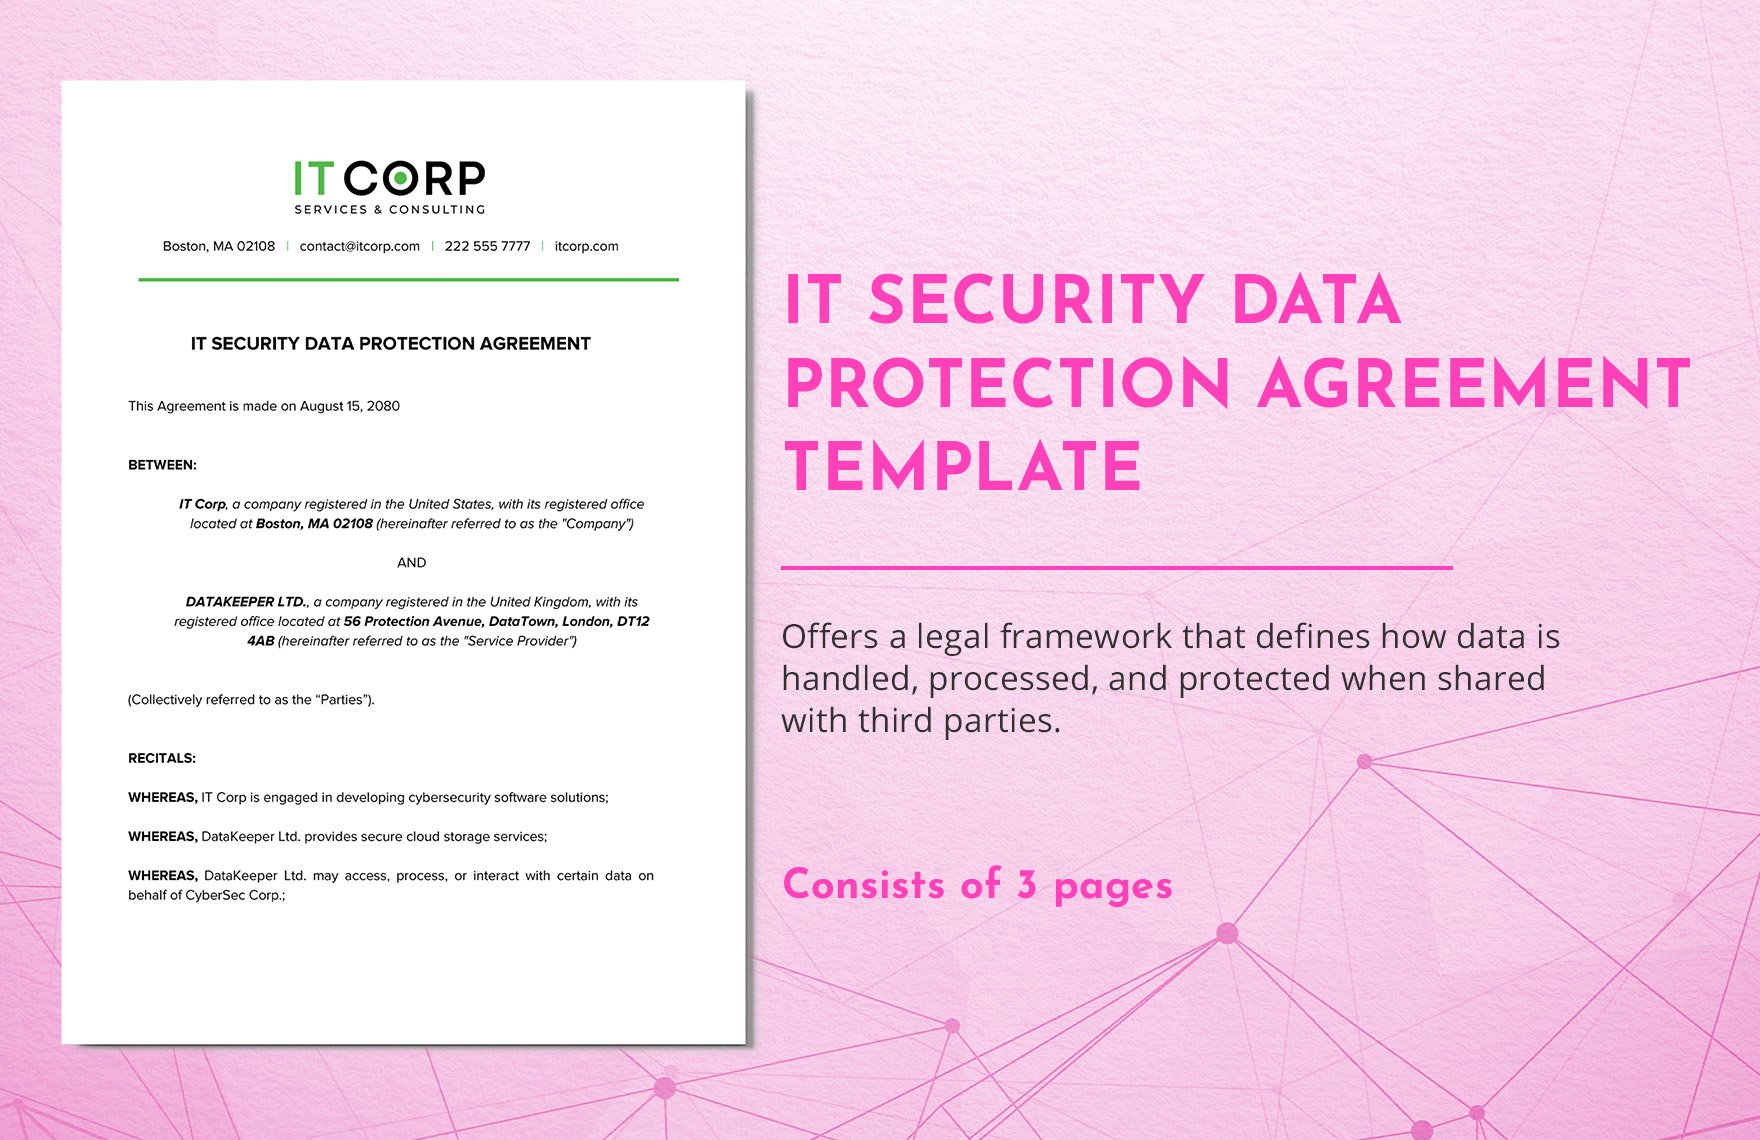 IT Security Data Protection Agreement Template